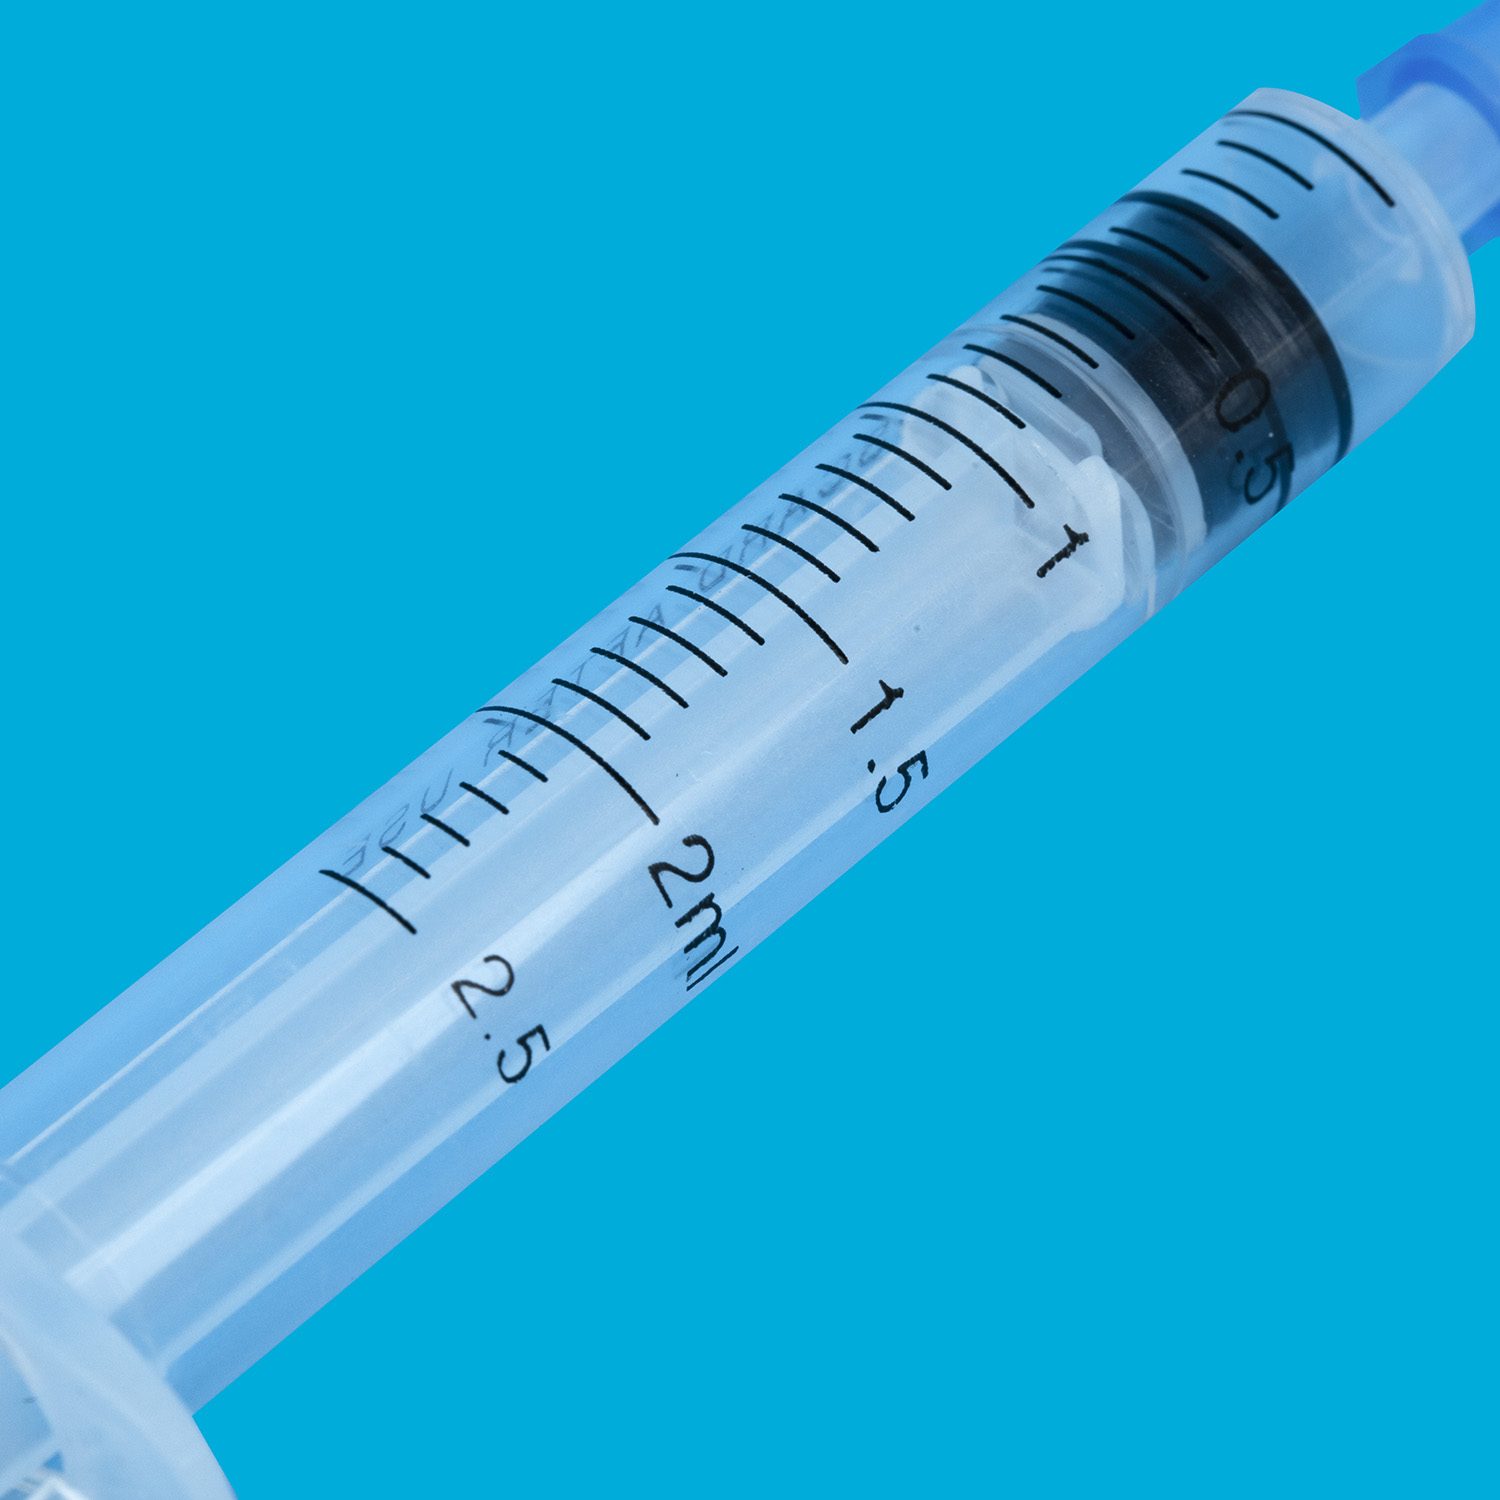 Revital Healthcare EPZ Ltd. Achieves WHO Prequalification for Early-Activation Auto-Disable Syringe: A Milestone for African Manufacturing and Immunization Programming - Africa.com